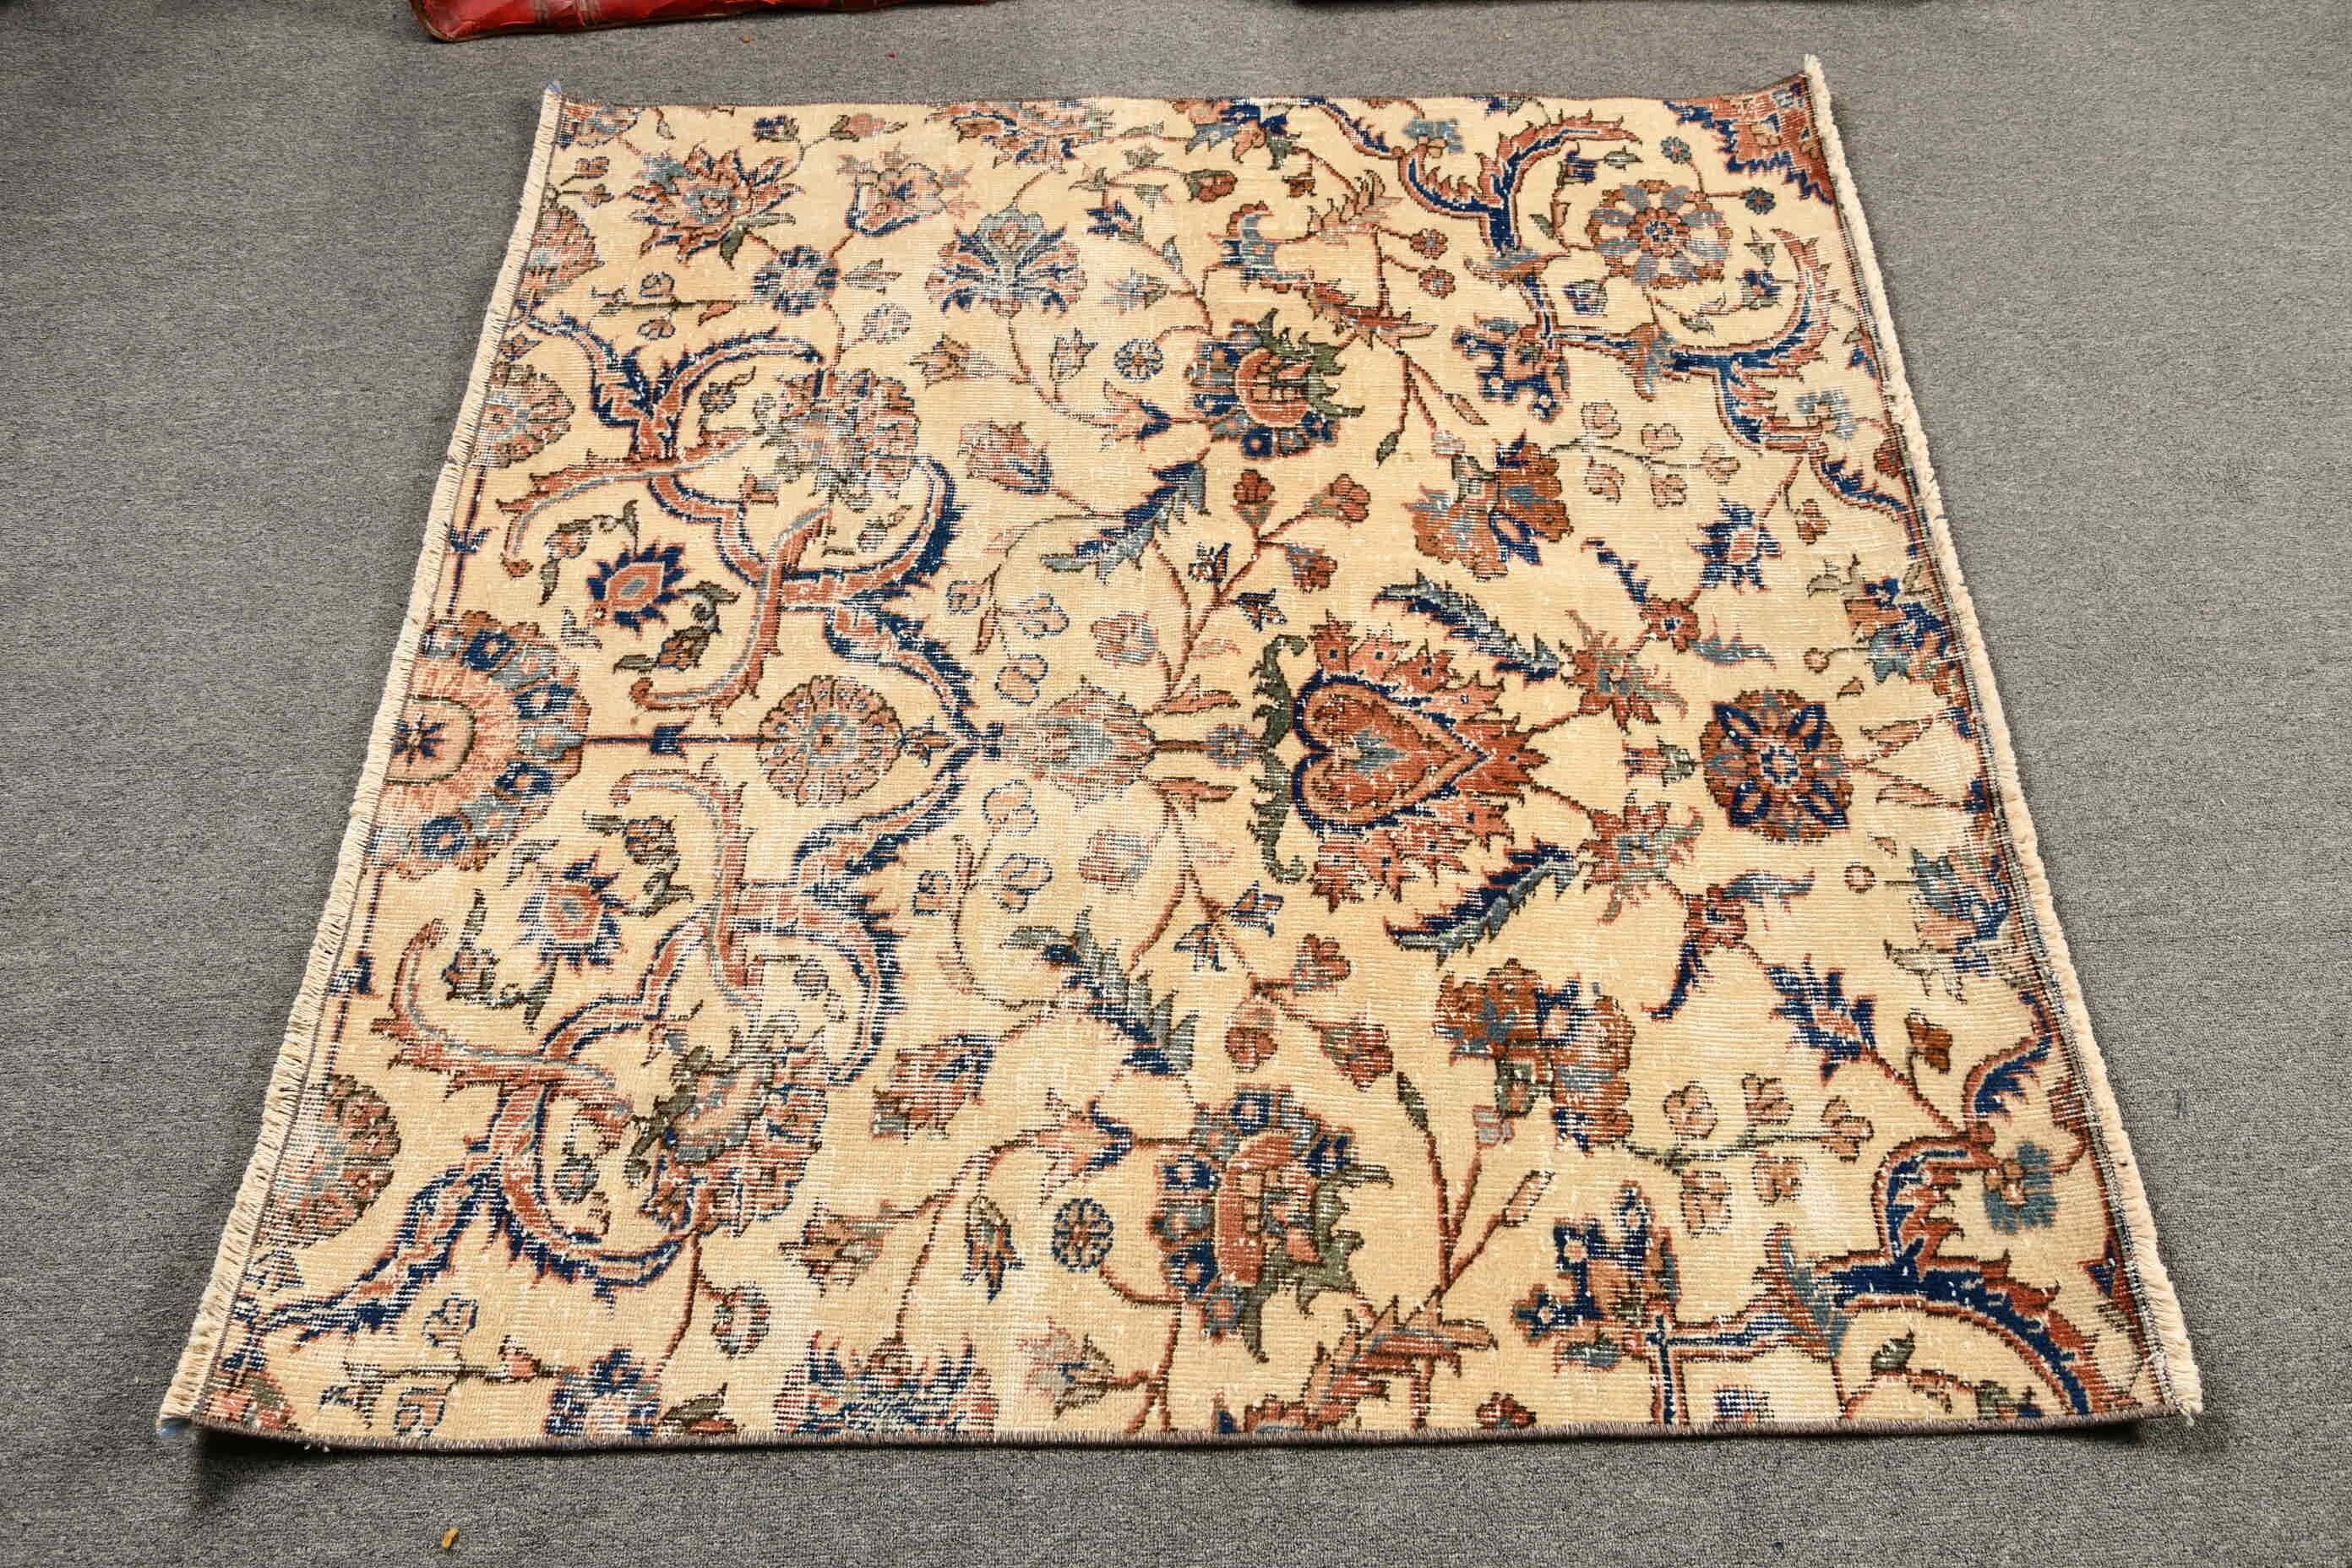 4.4x4.2 ft Accent Rugs, Rugs for Entry, Kitchen Rug, Beige Moroccan Rug, Oushak Rug, Turkish Rugs, Entry Rug, Vintage Rugs, Oriental Rugs